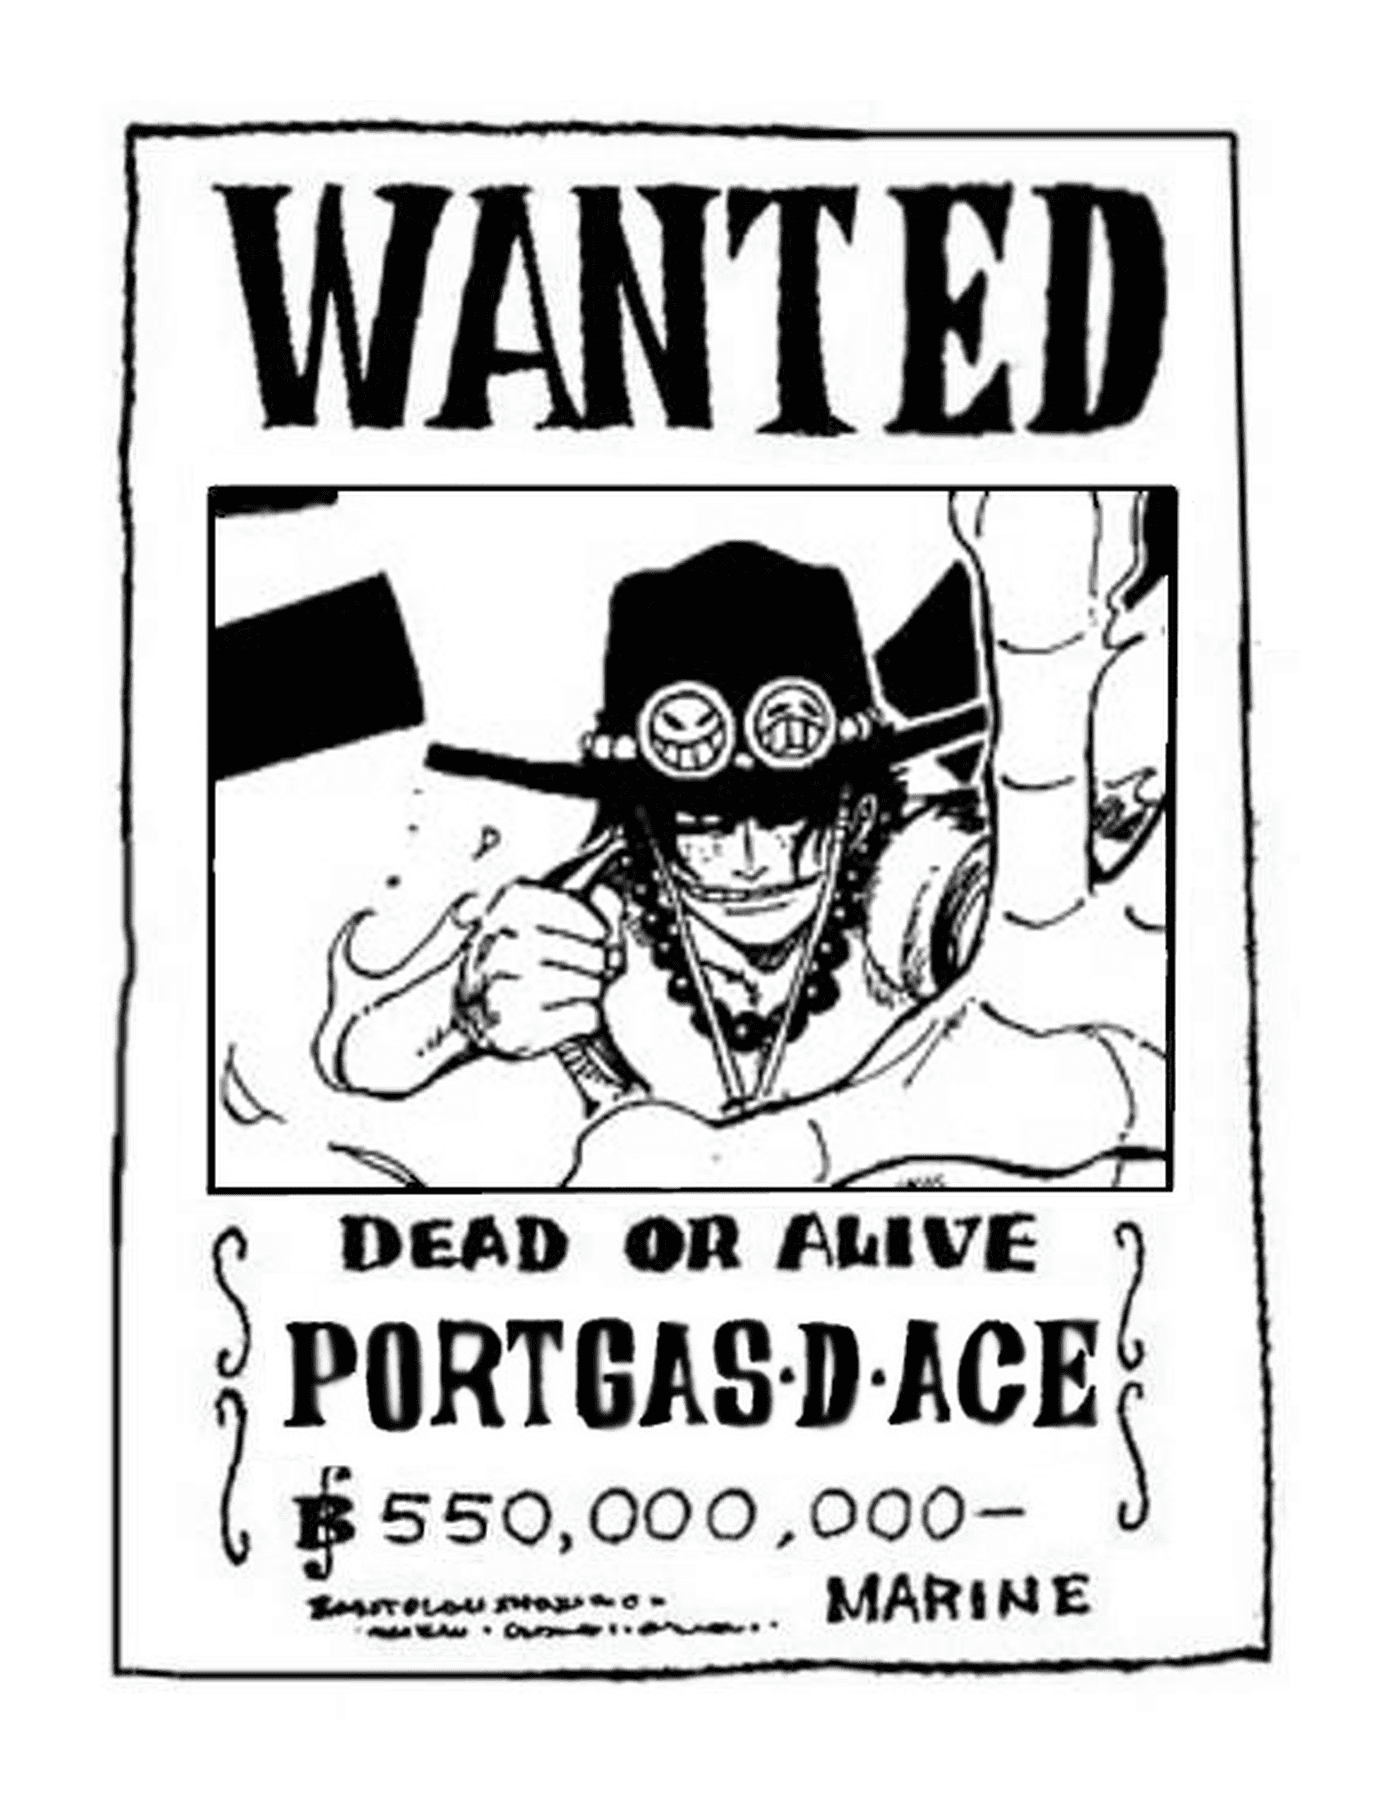  Wanted Portgas D. Ace, dead or alive 